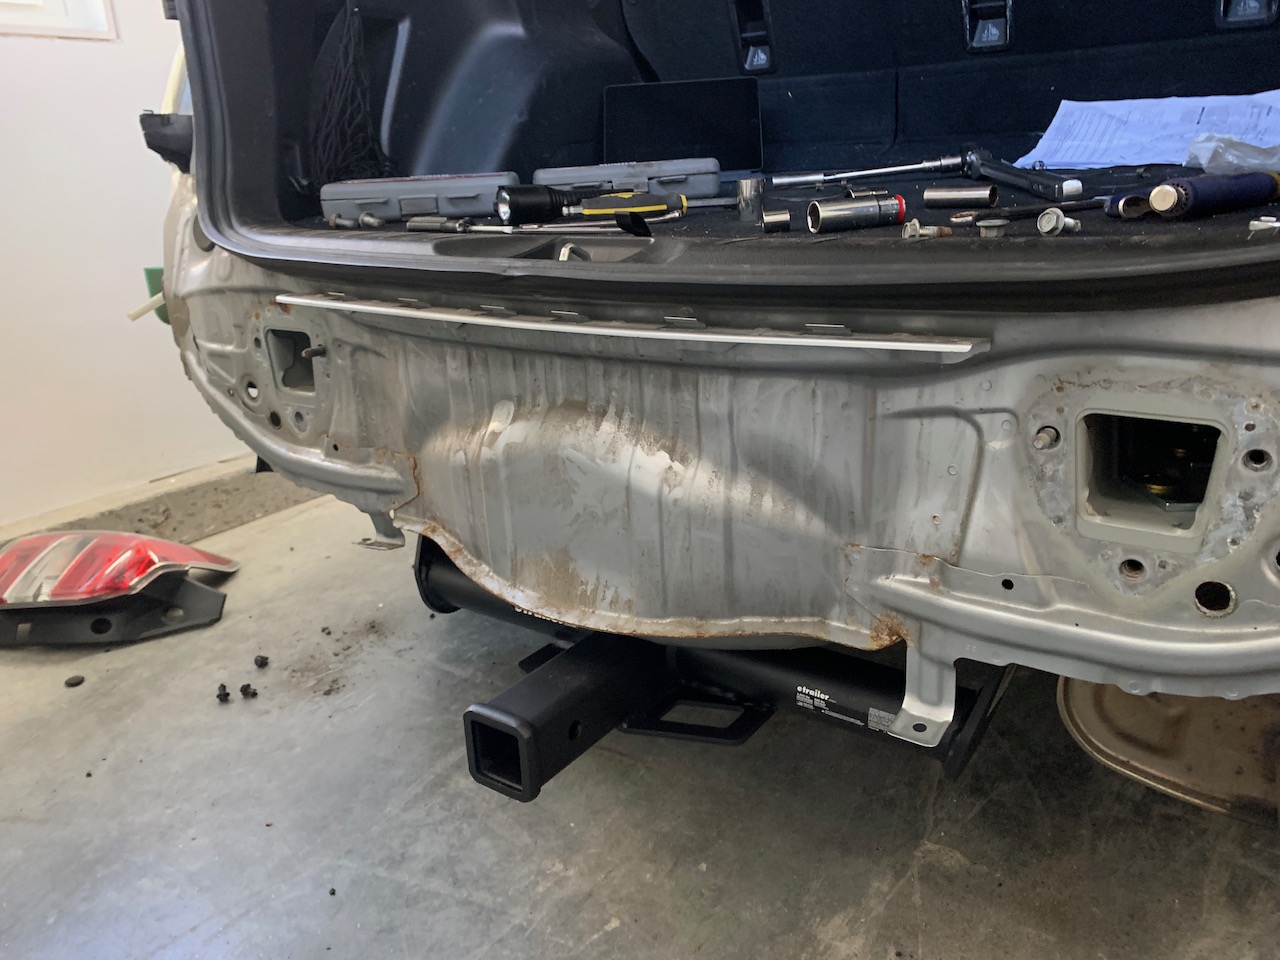 2014 Subaru Forester with the bumper removed for a hitch install.